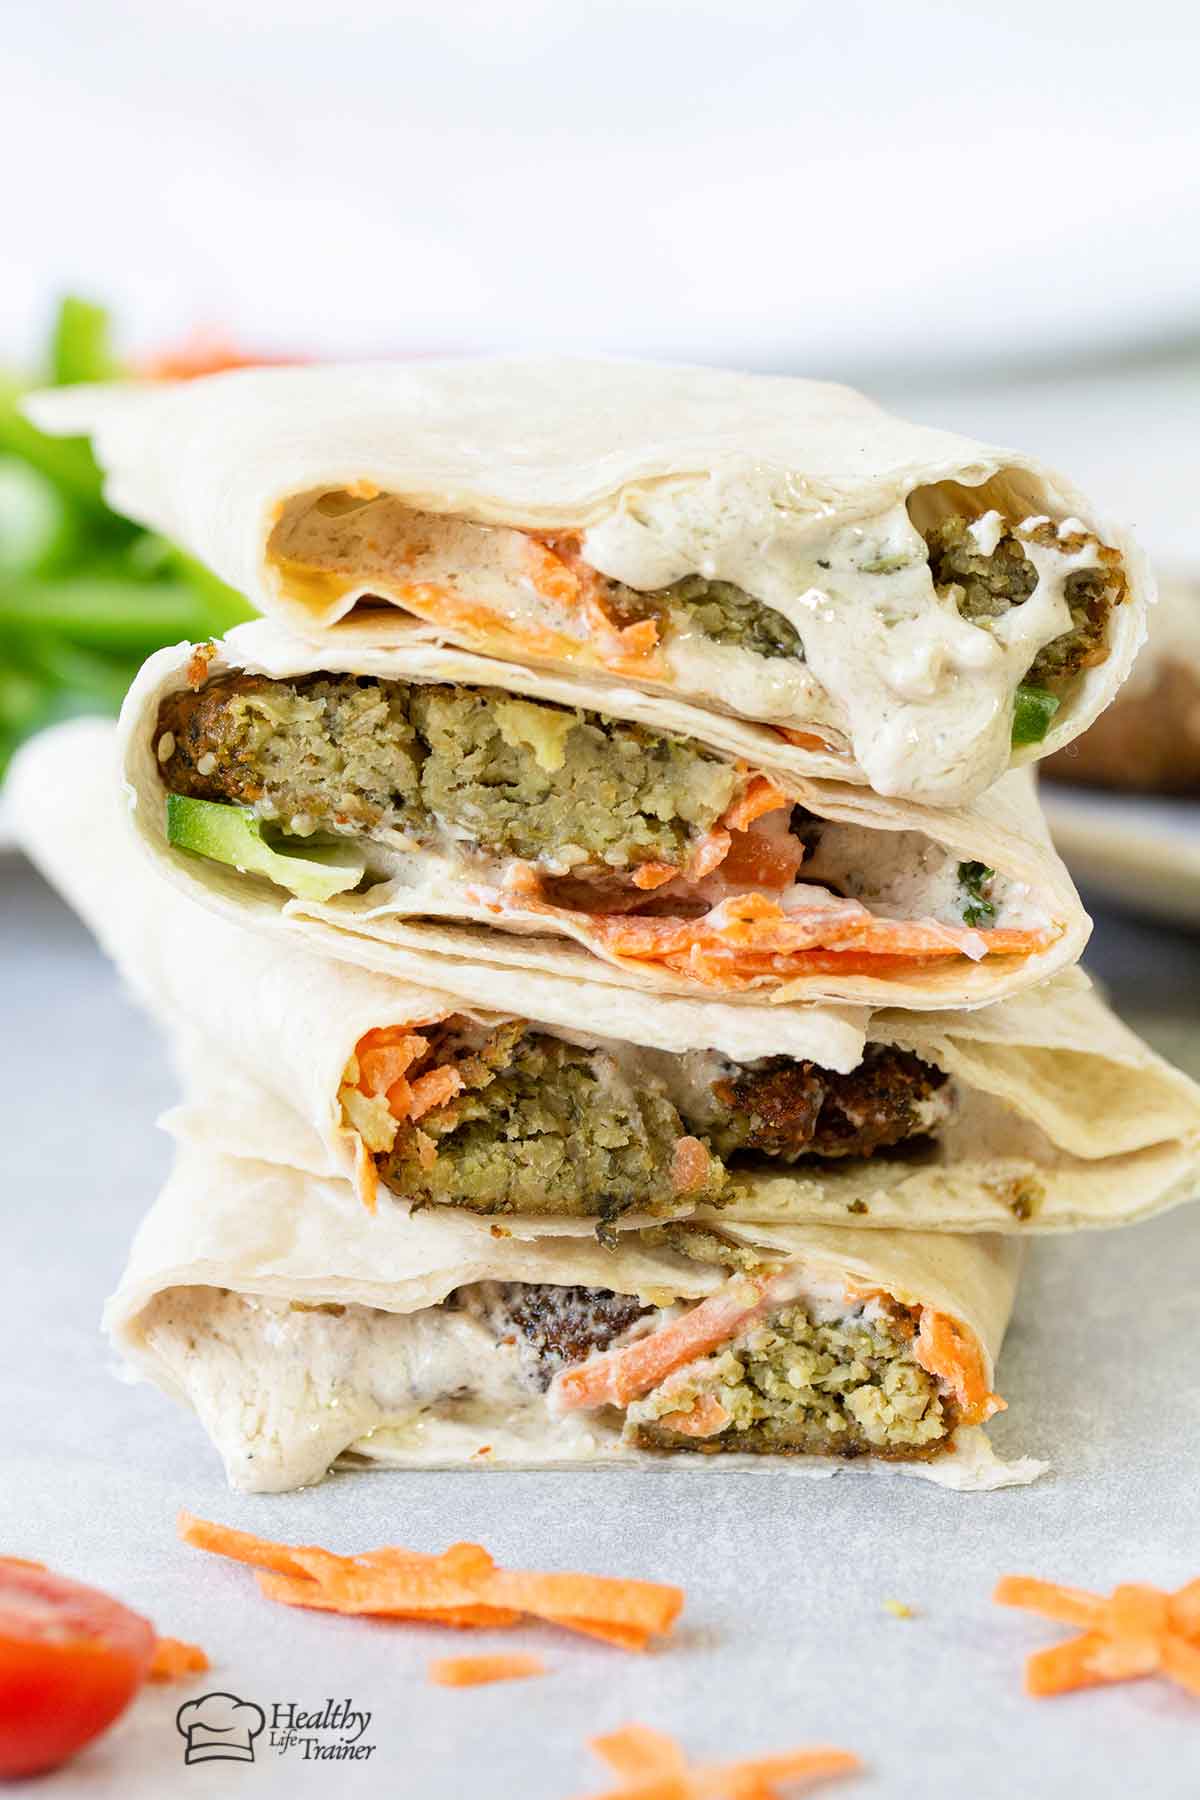 Authentic Lebanese Falafel sandwiches topped with tahini sauce.